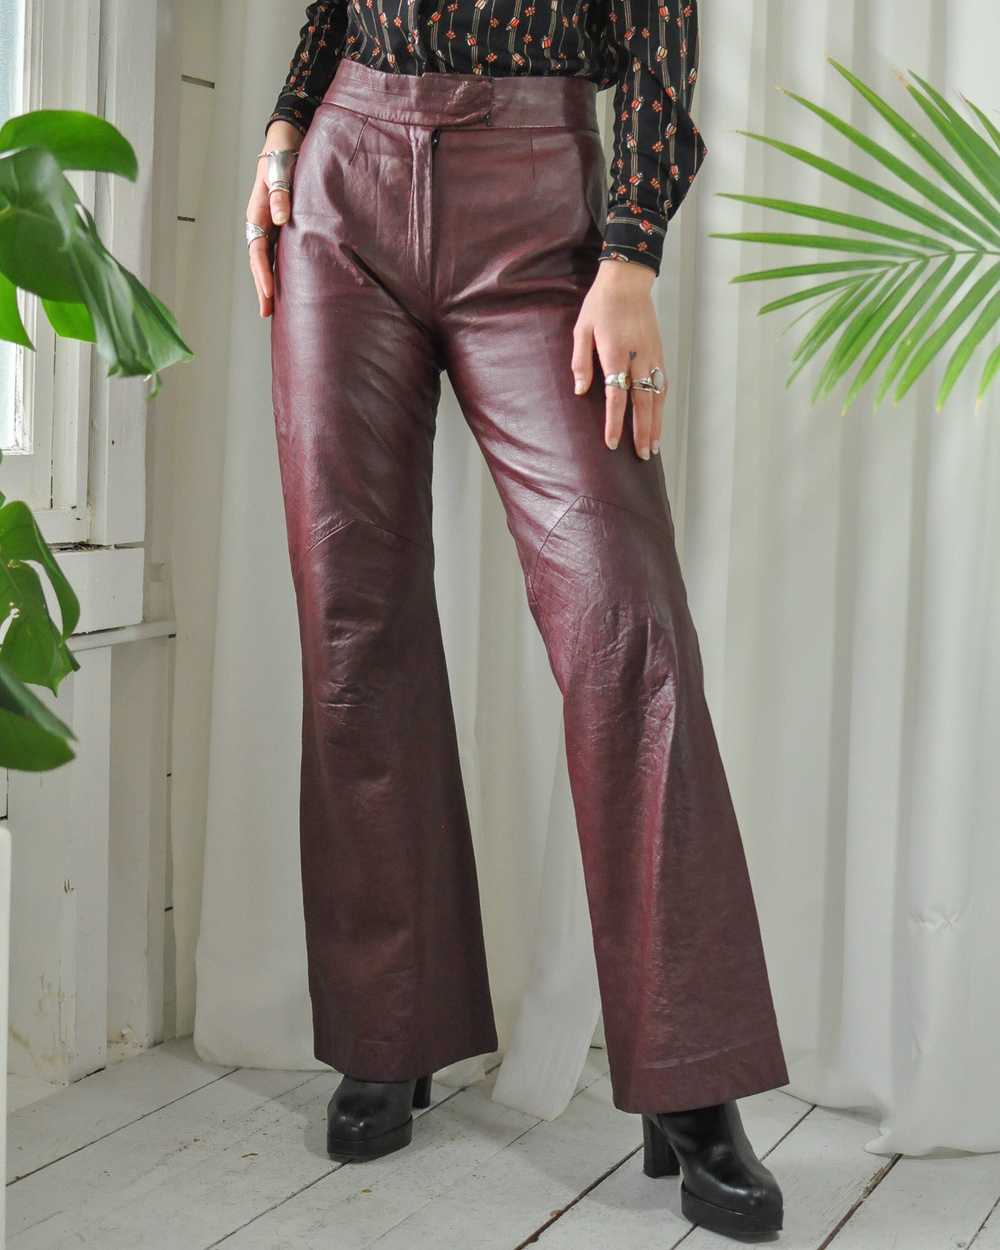 70s Burgundy Leather Pant Suit - image 8